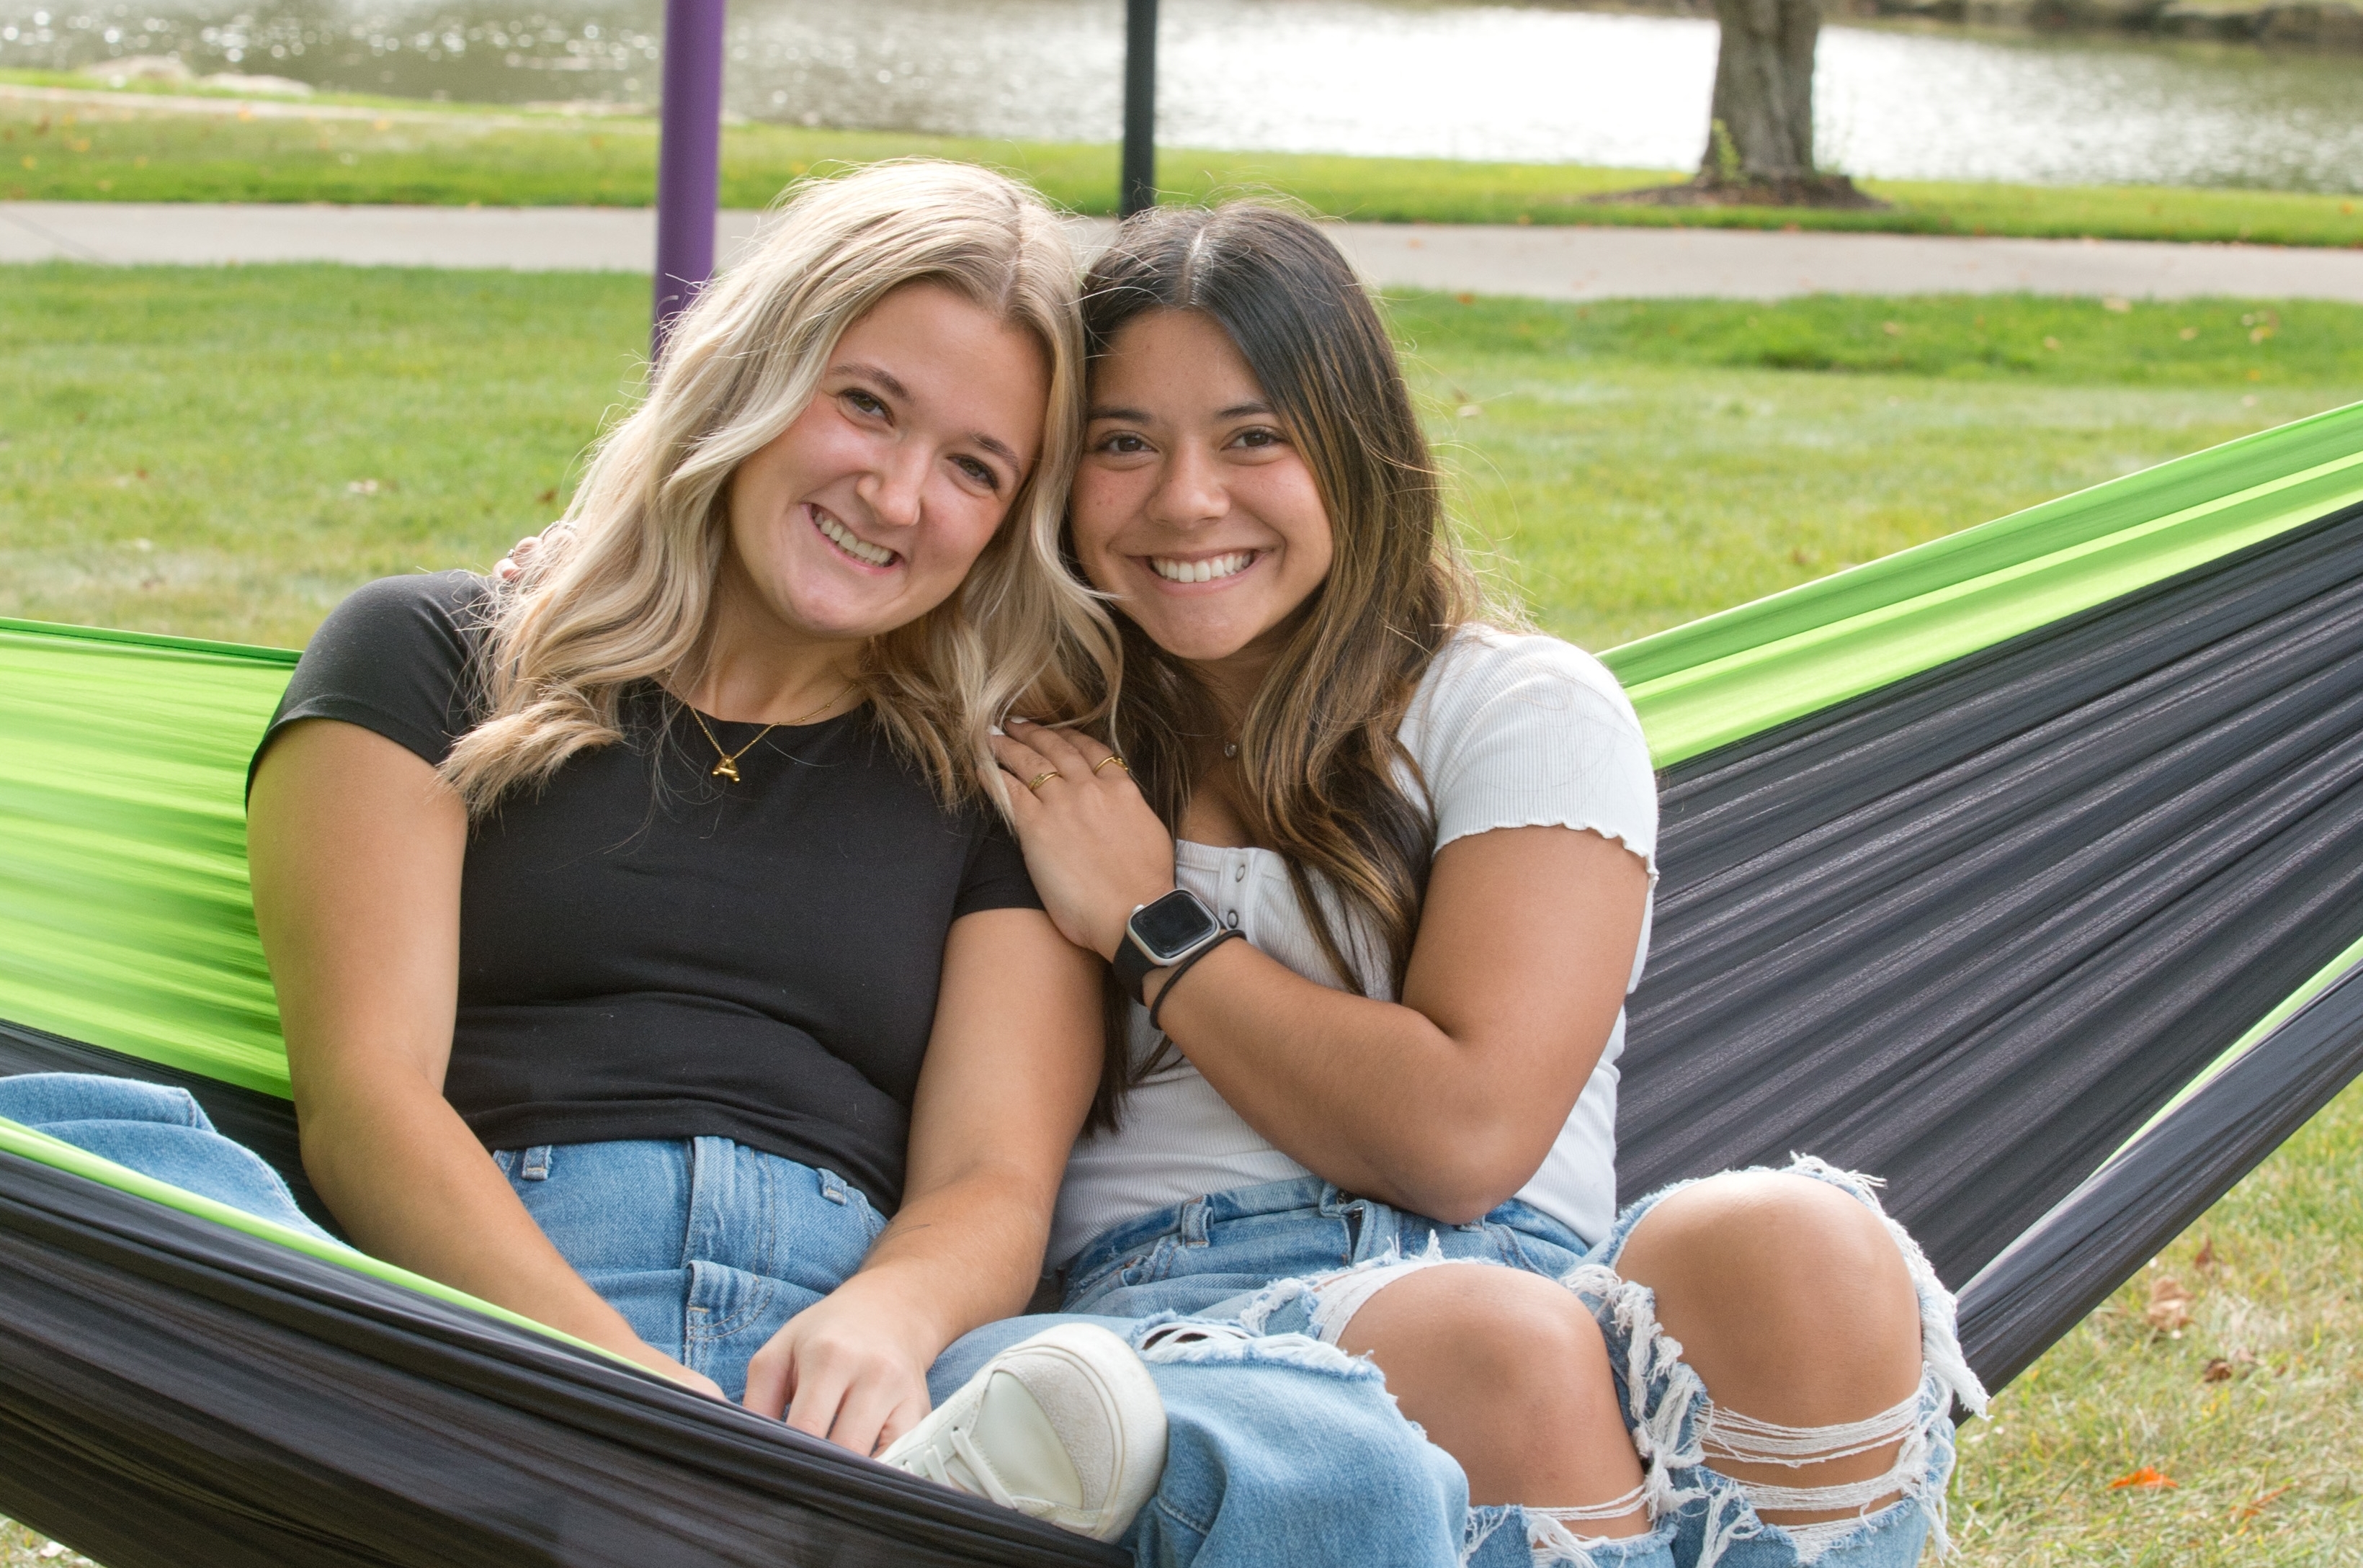 Mount Union students smiling on a hammock by the lakes.